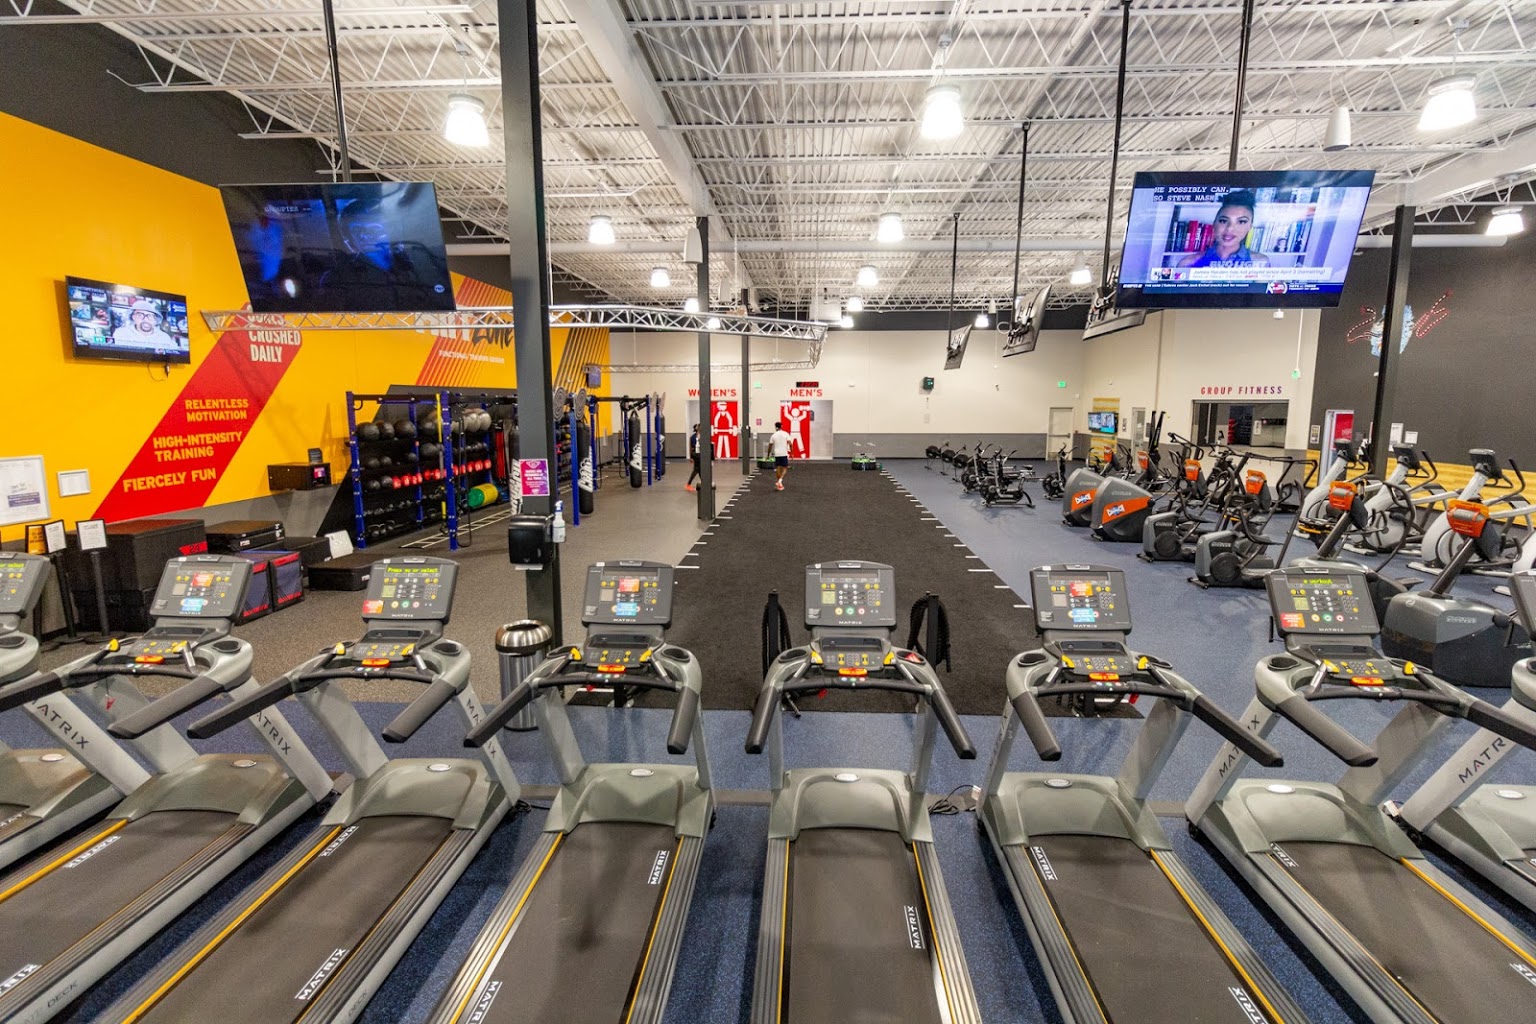 Crunch Fitness Gym In Timonium Md Google Business View Interactive Tour Merchant View 360